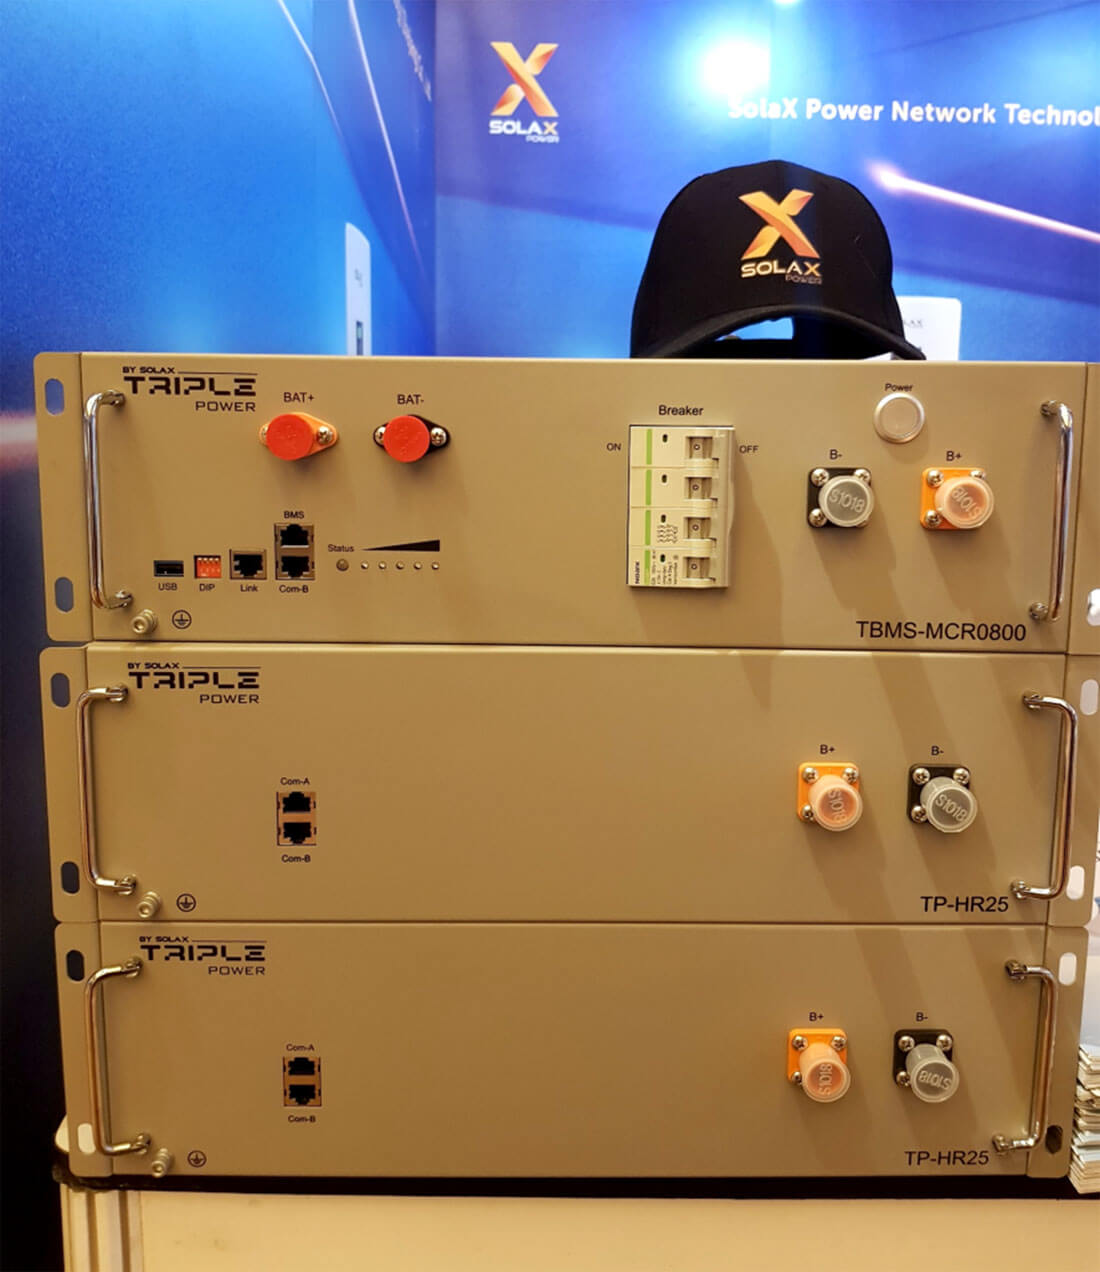 SolaX Power LV Storage Solutions Debuted at SEVF2022